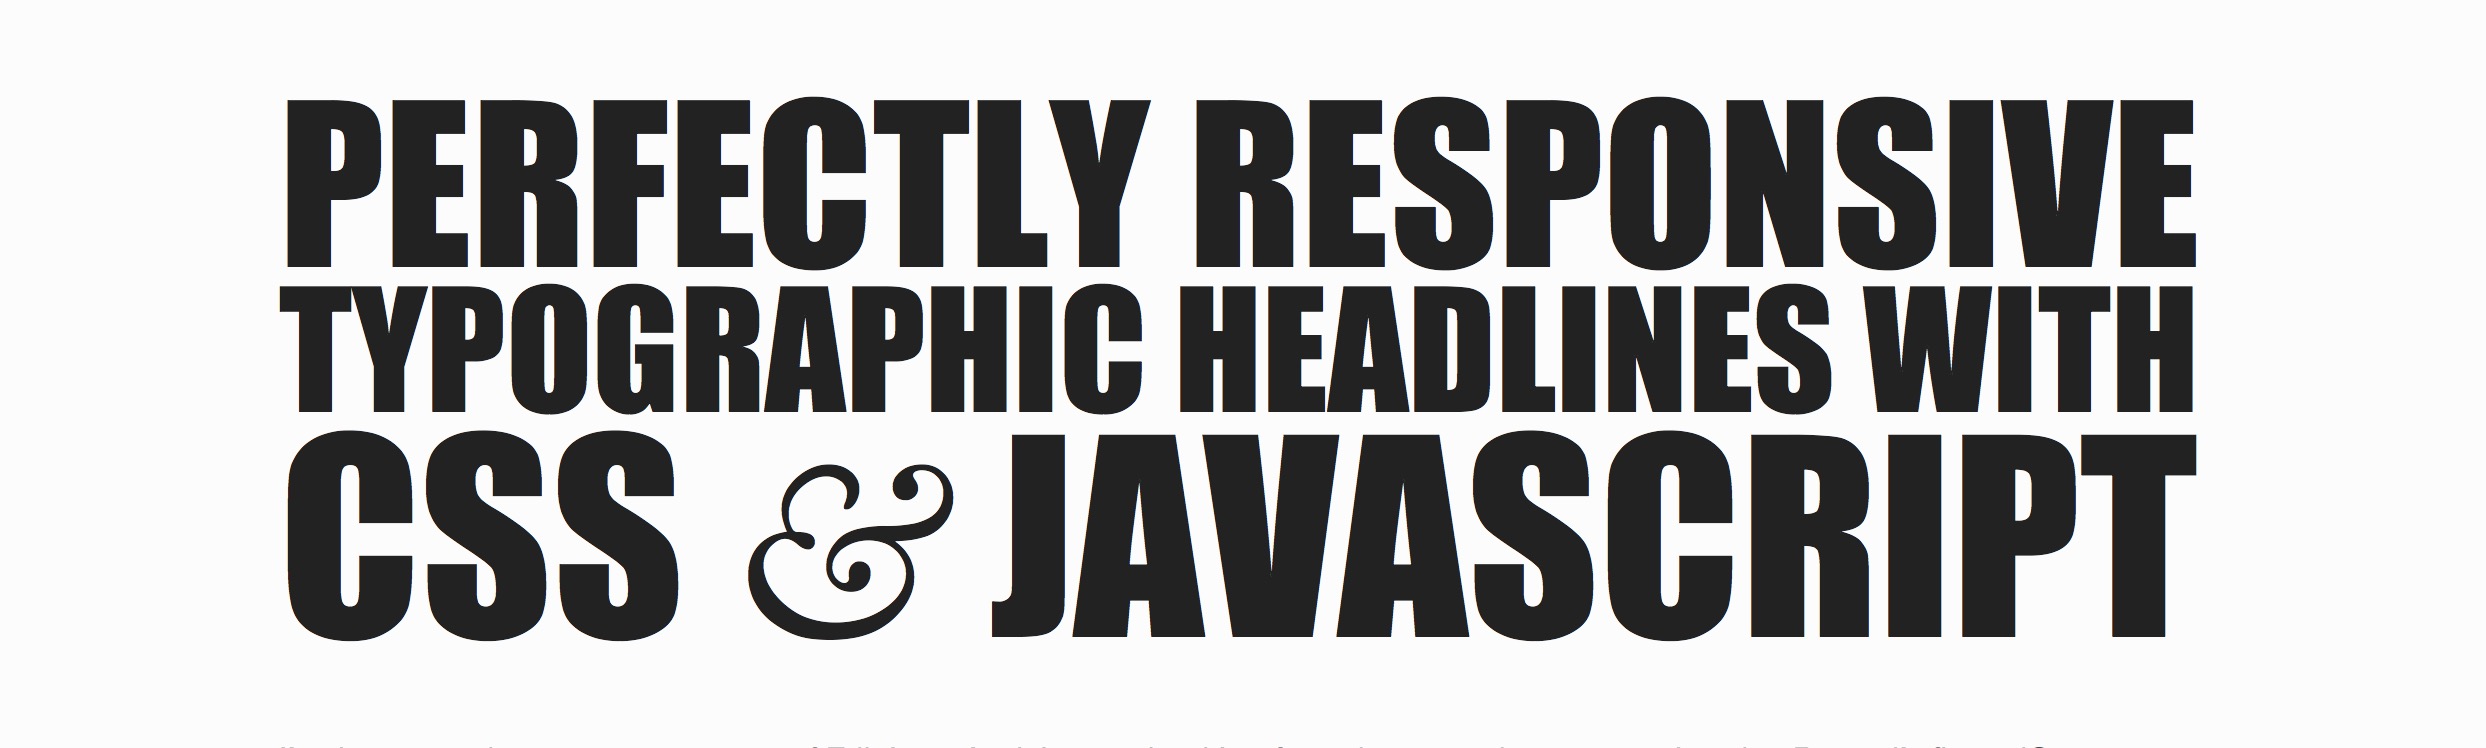 Perfectly responsive headlines with CSS and Javascript